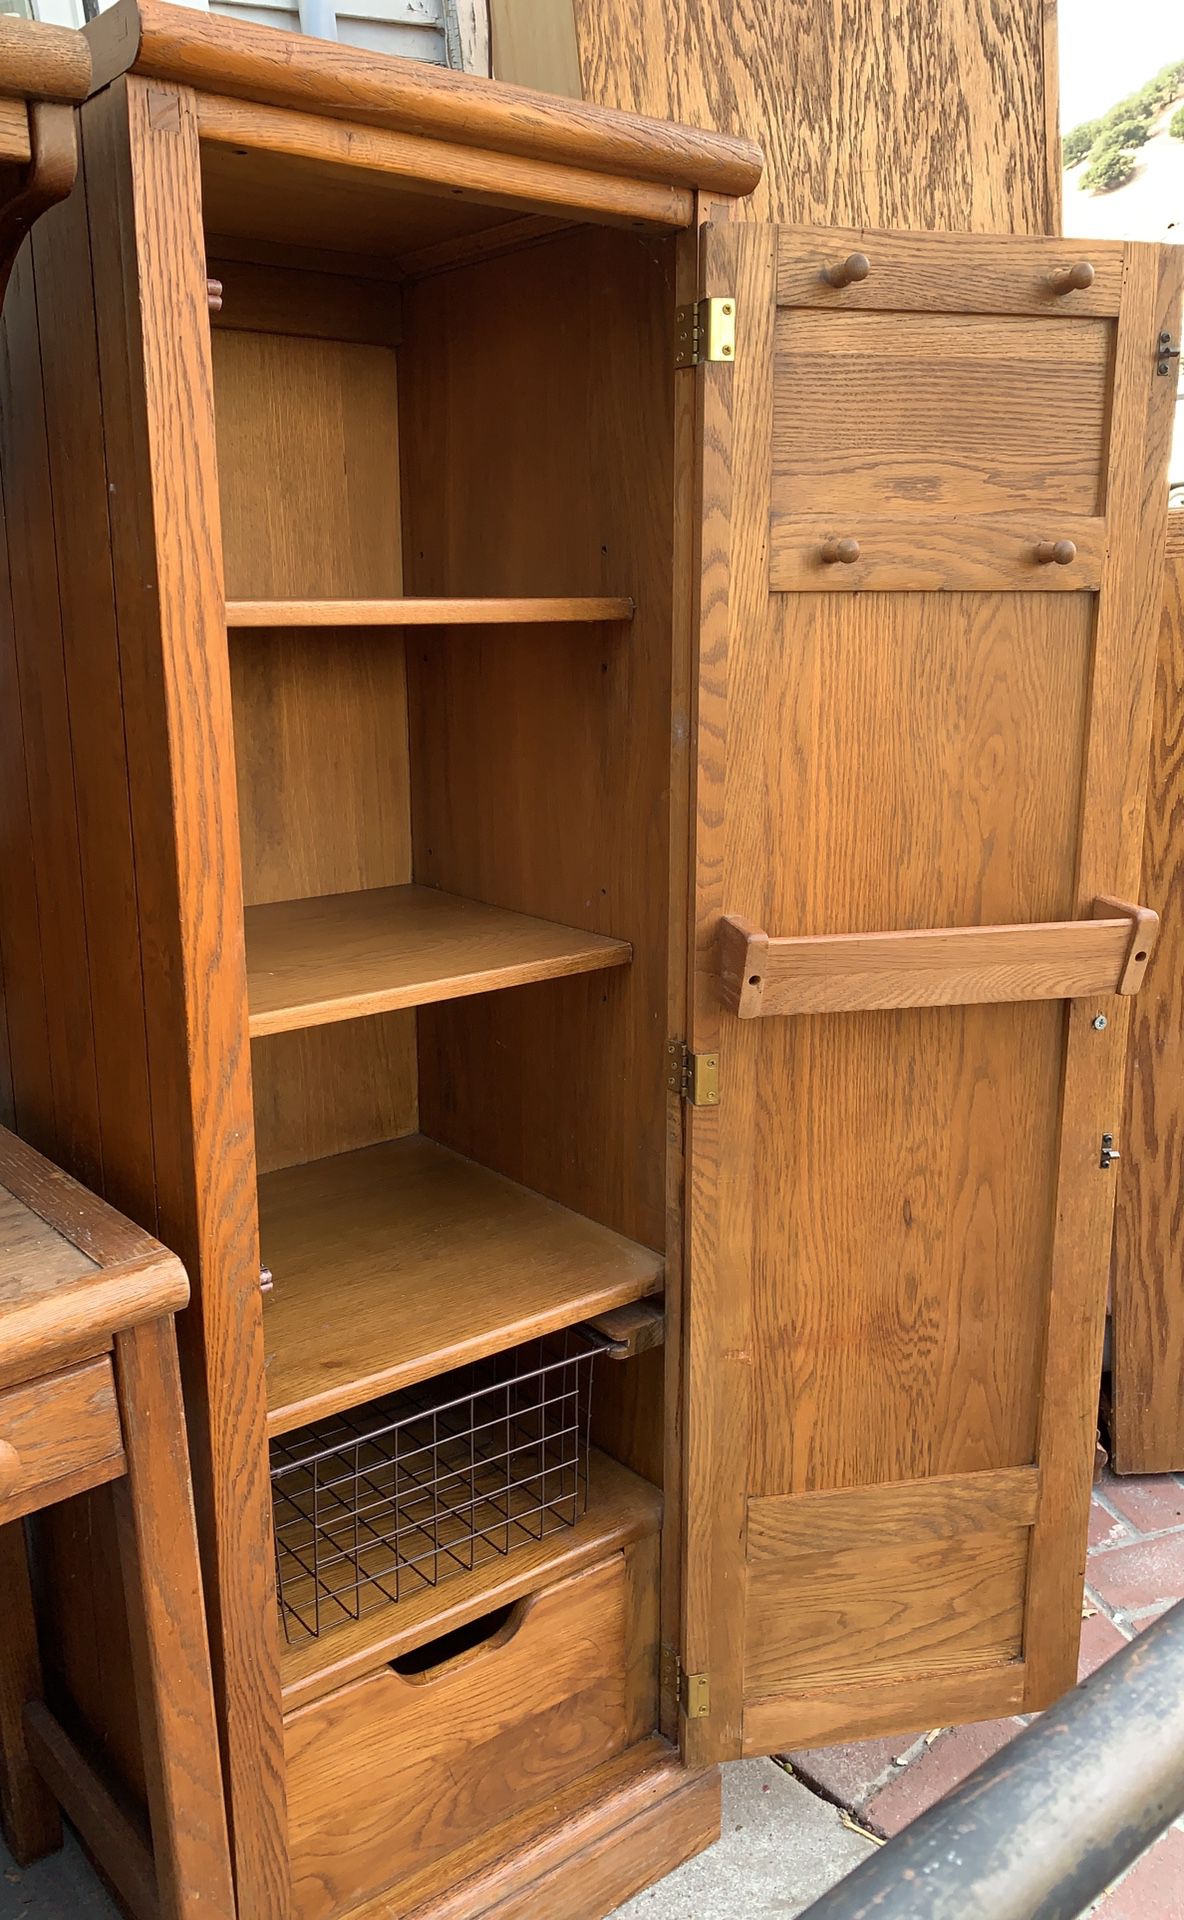 Very cute bedroom set. Twin headboard with overhead light and pegboard. Desk with chair. Two side lockers solid oak fits in a small bedroom nicely.